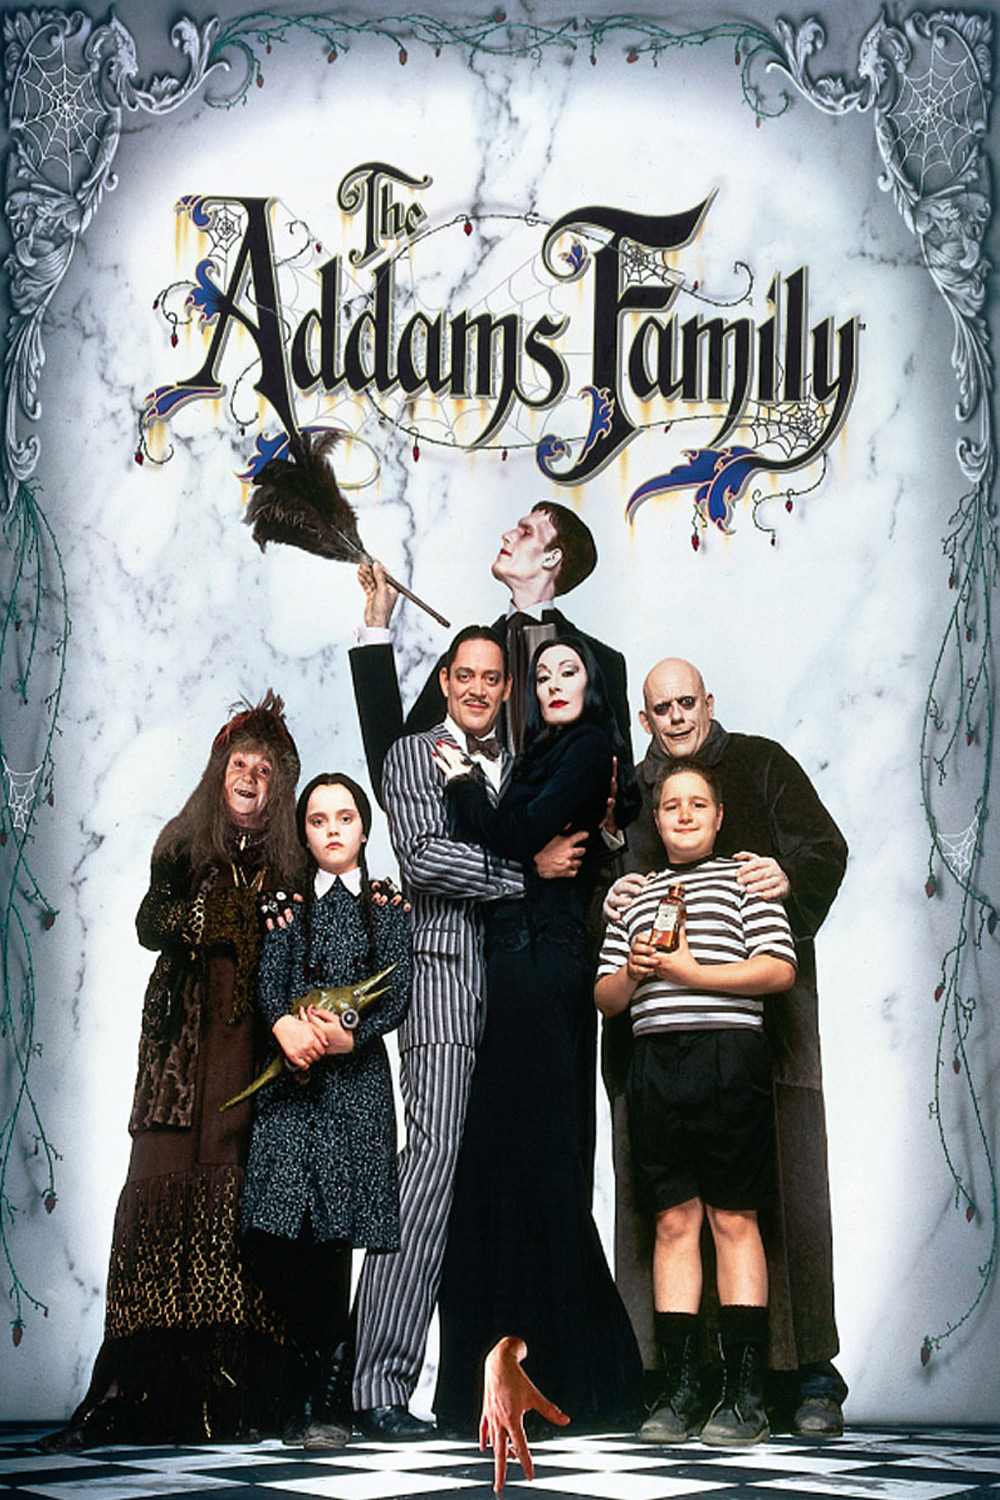 Addams Family and Addams Family Values – The Good The Bad And The Odd